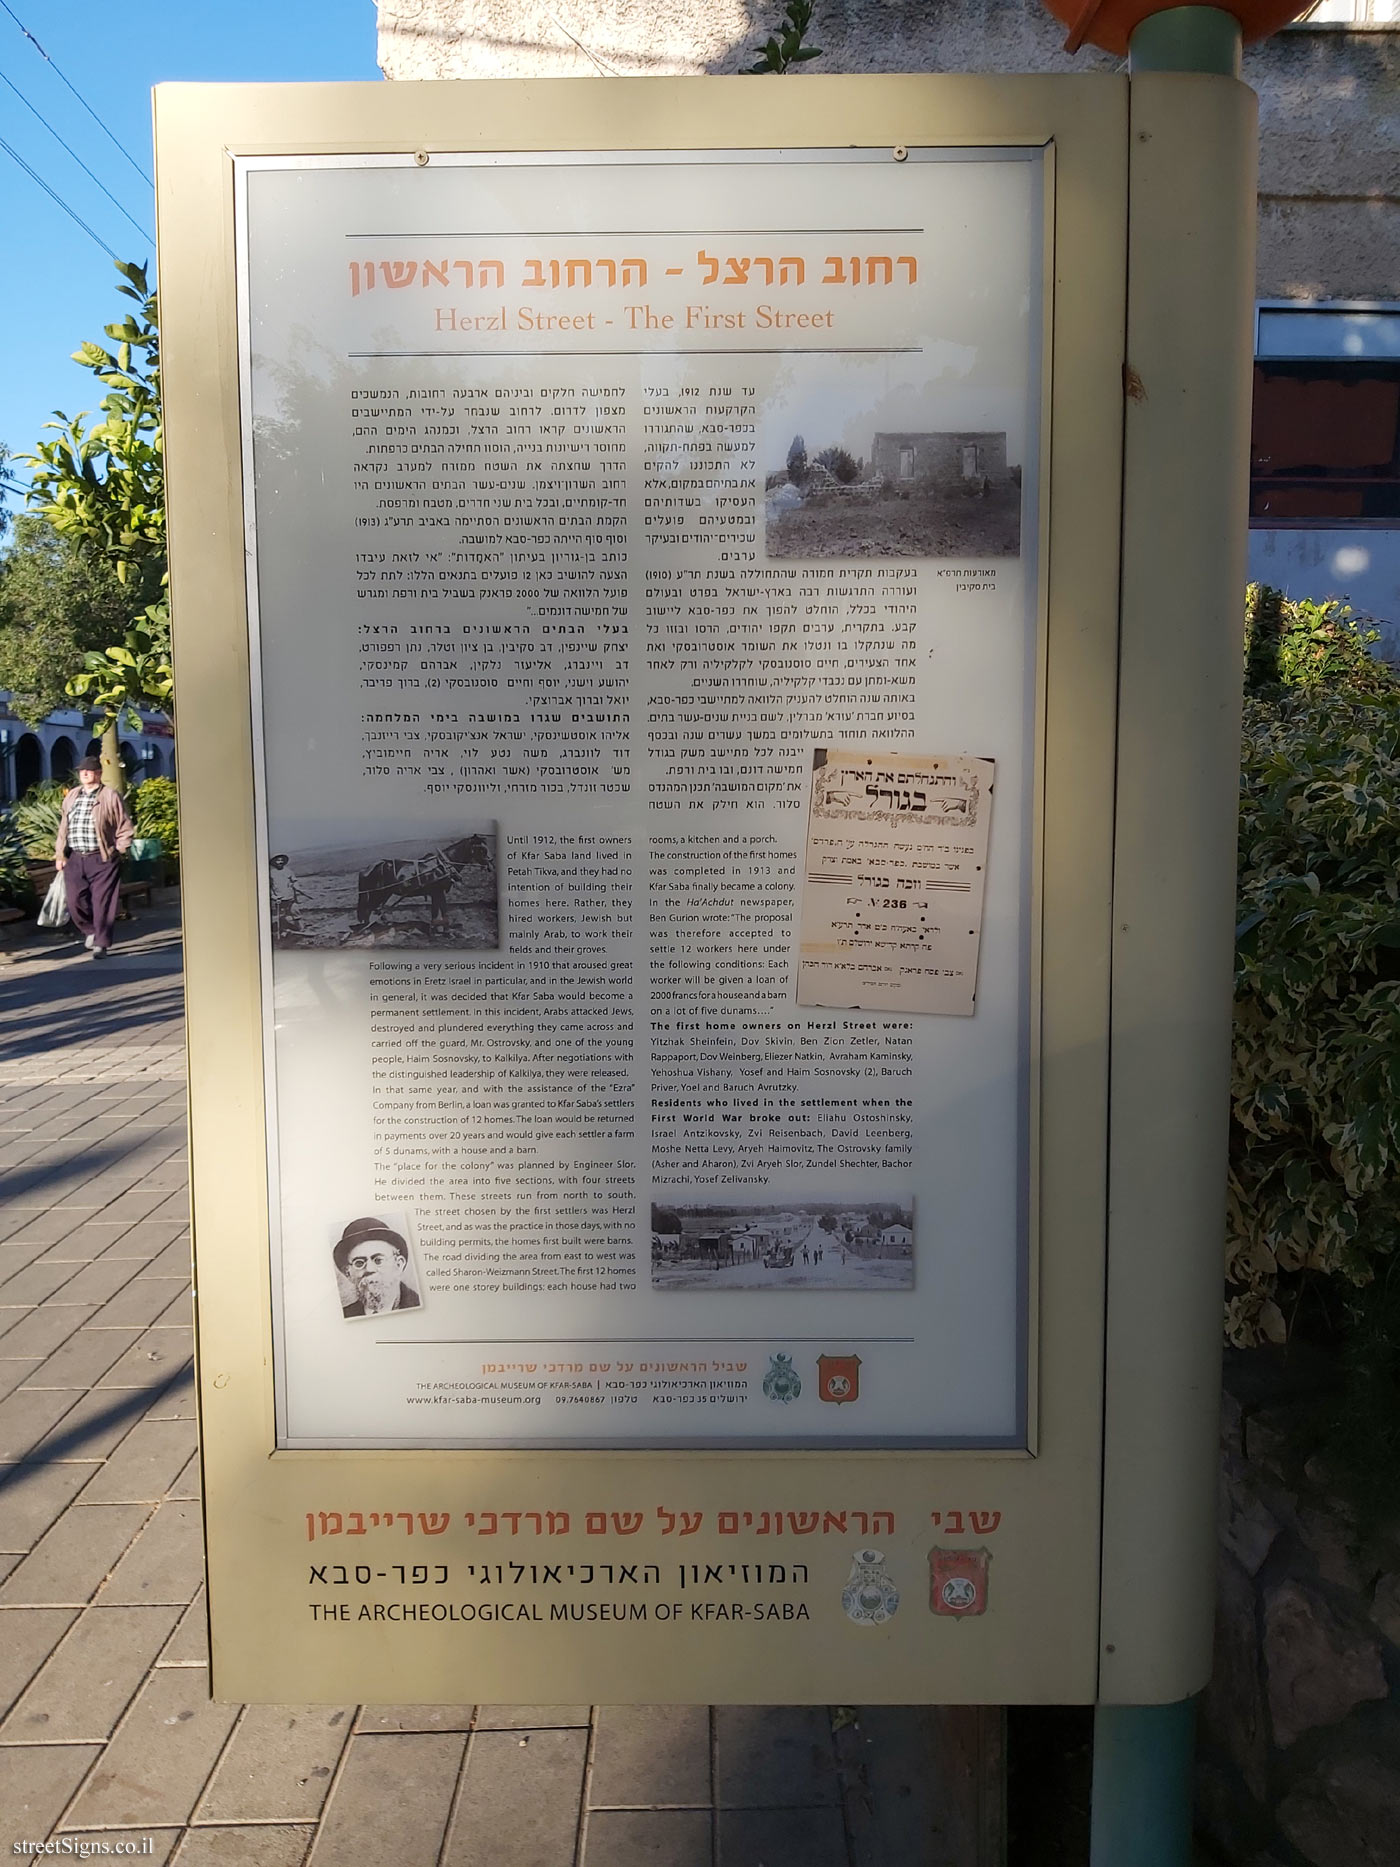 Kfar Saba - The Founders’ Path - Station 5 - Herzel Street - The First Street (the other side)